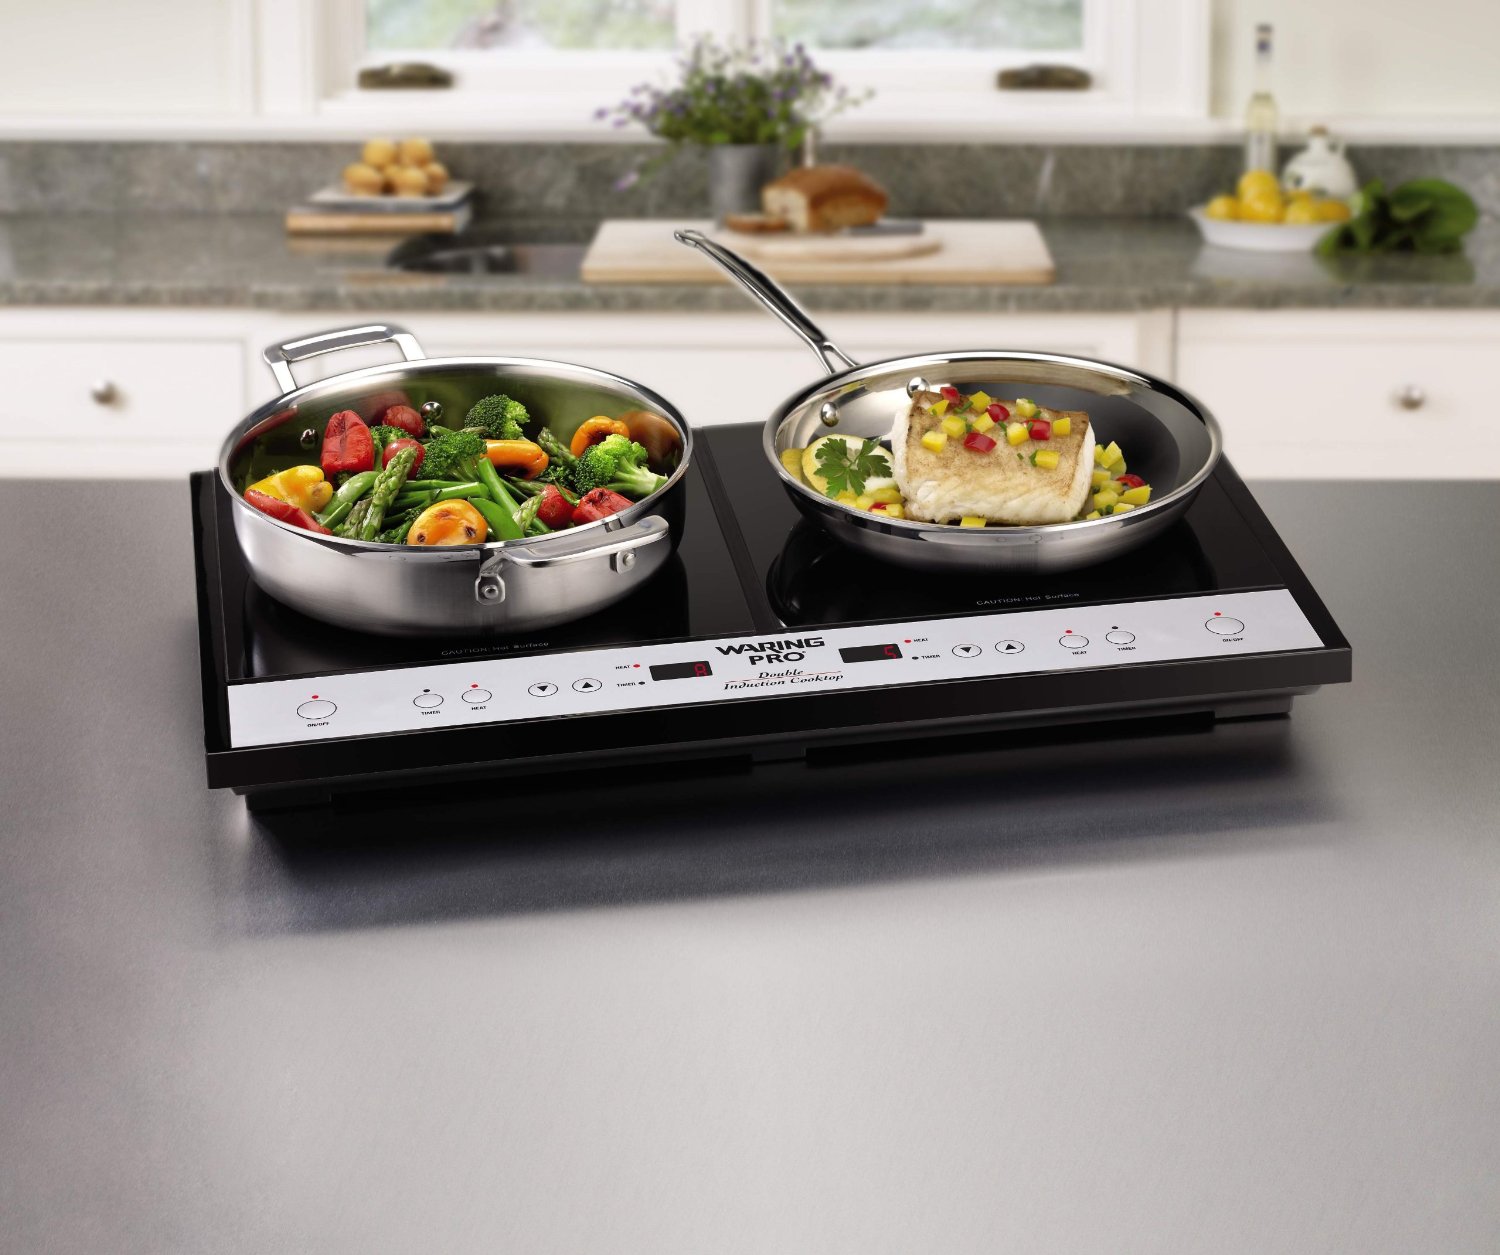 Waring Pro ICT400 Double Induction Cooktop Review